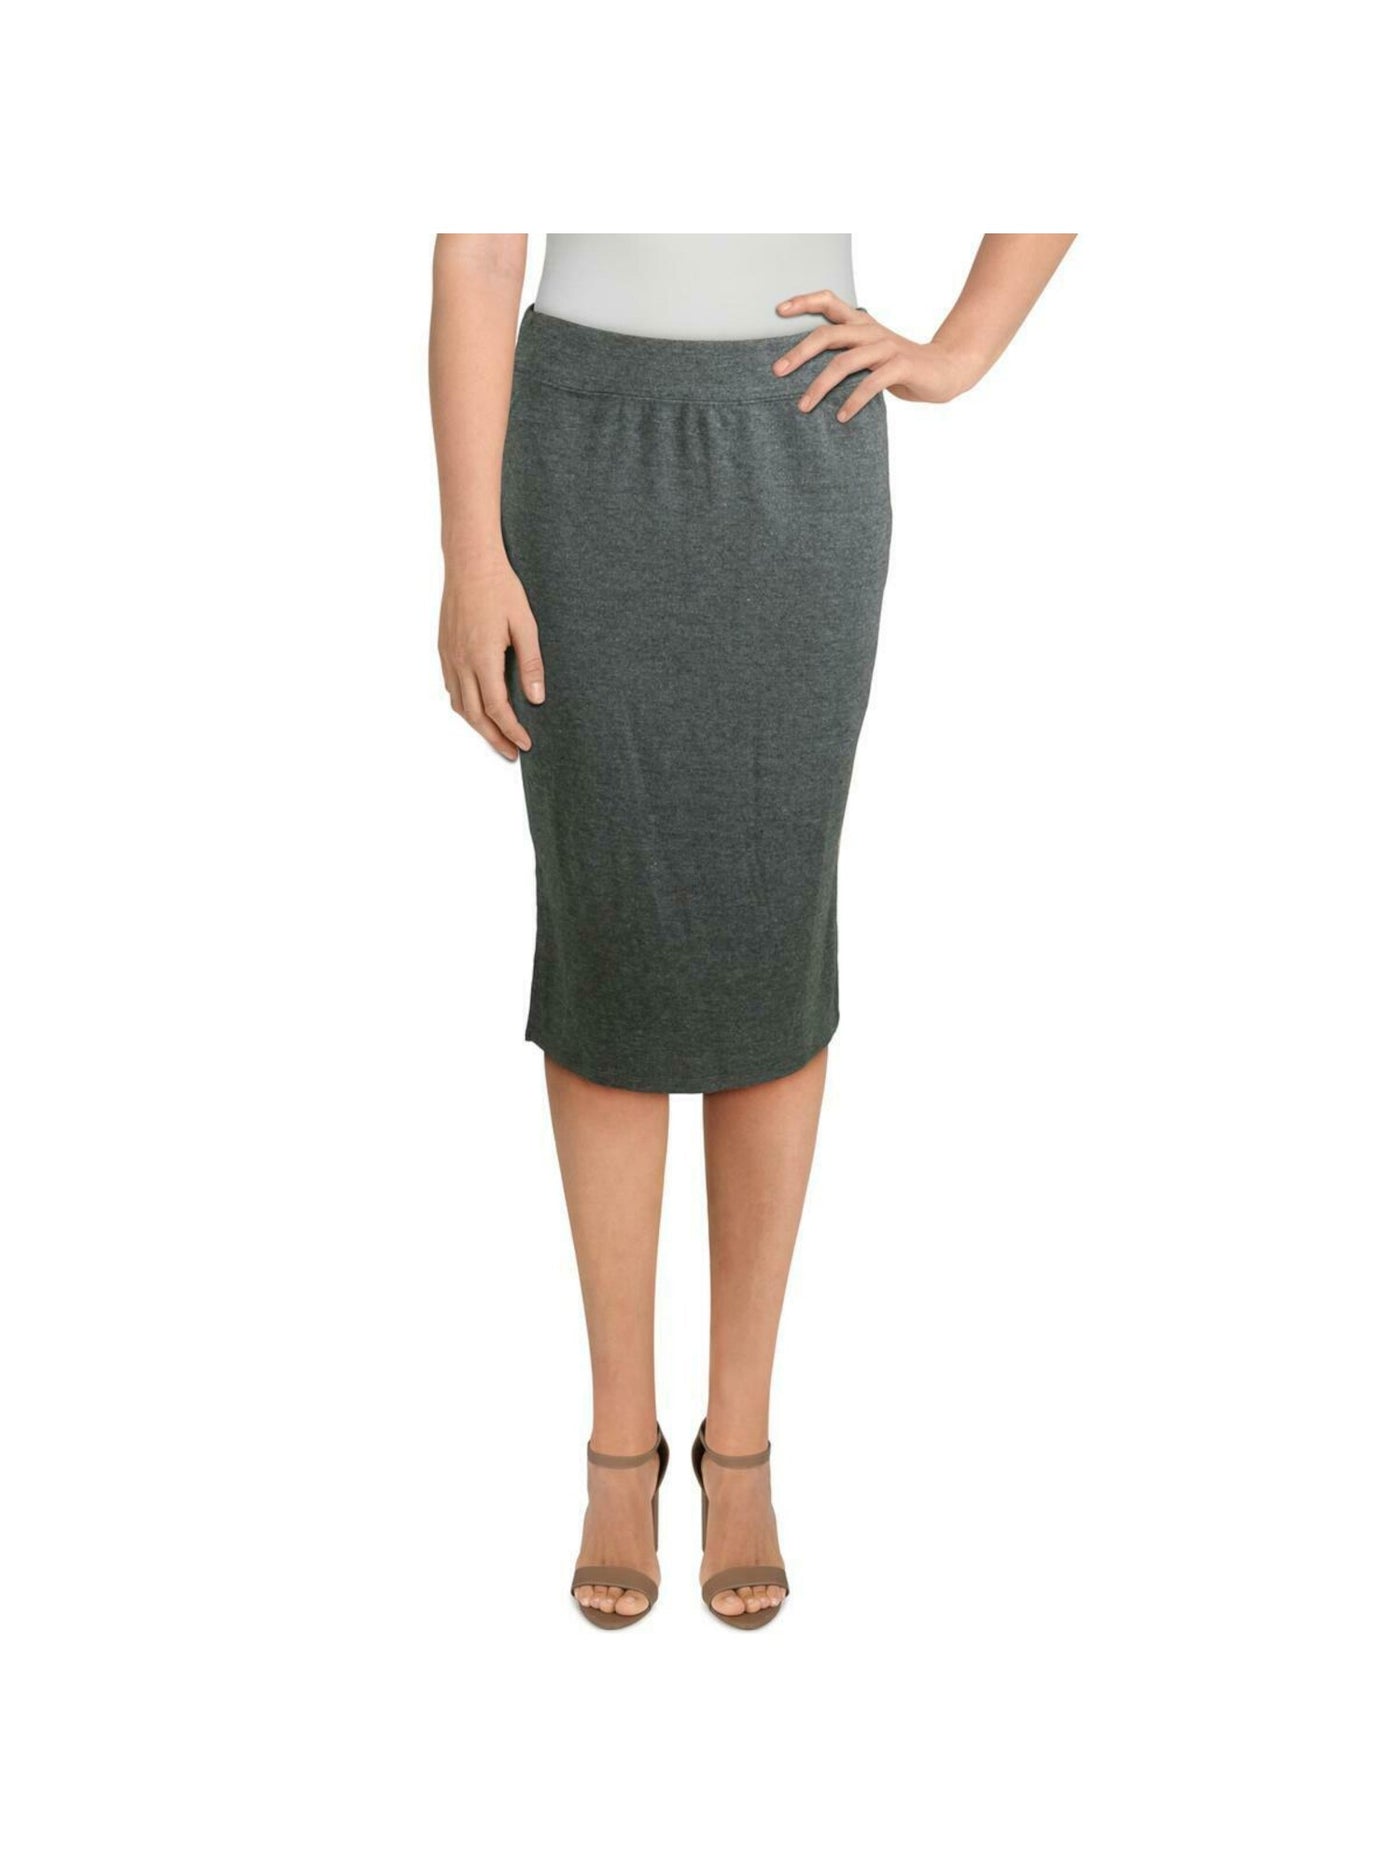 PHILOSOPHY Womens Green Slitted Pull-on Below The Knee Wear To Work Pencil Skirt M